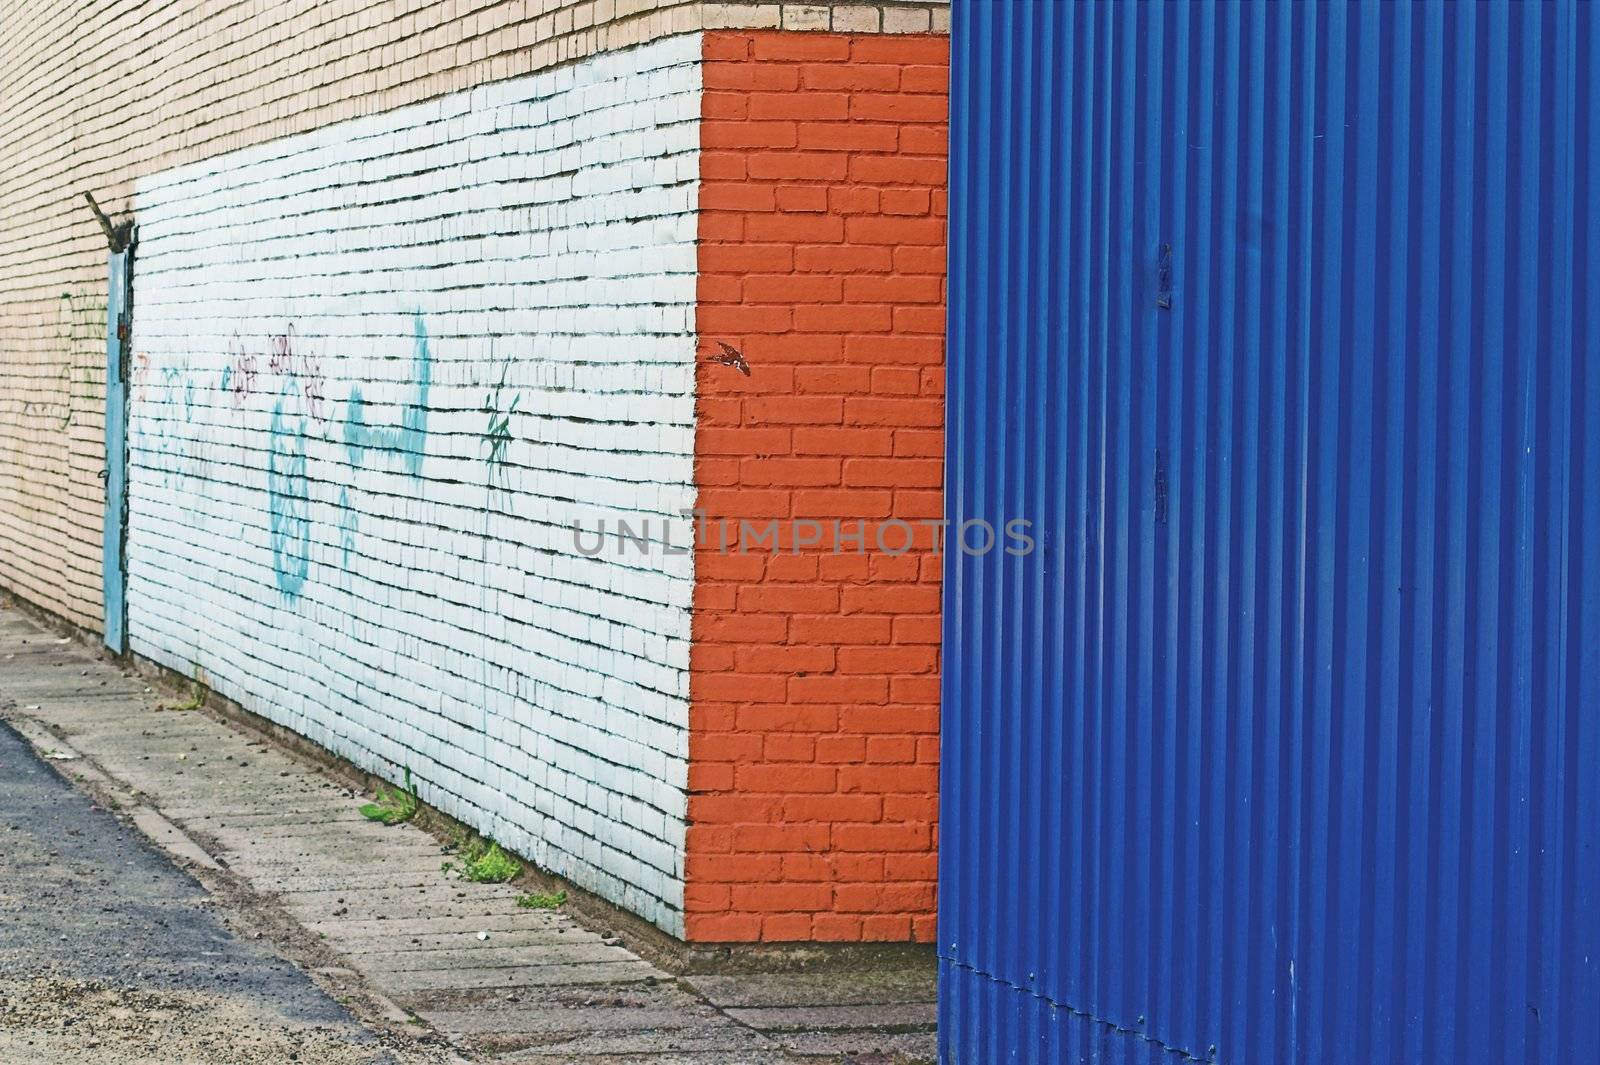 Close-up view of corner and painted wall with graffiti